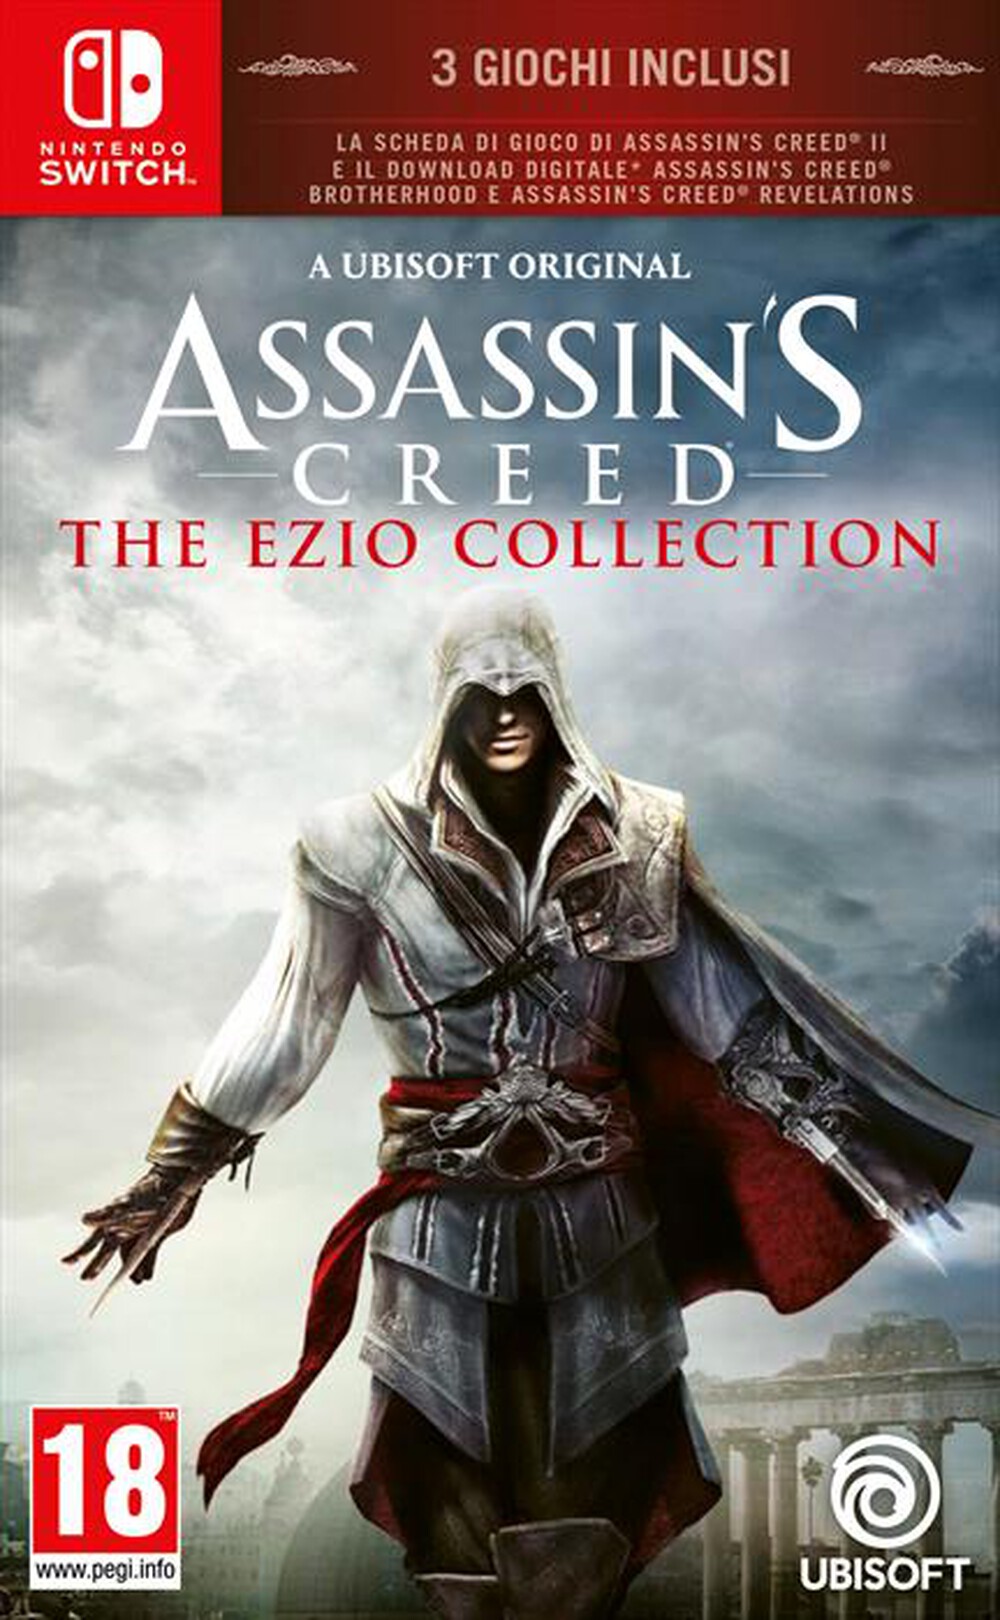 "UBISOFT - ASSASSIN'S CREED THE EZIO COLLECTION SWITCH"